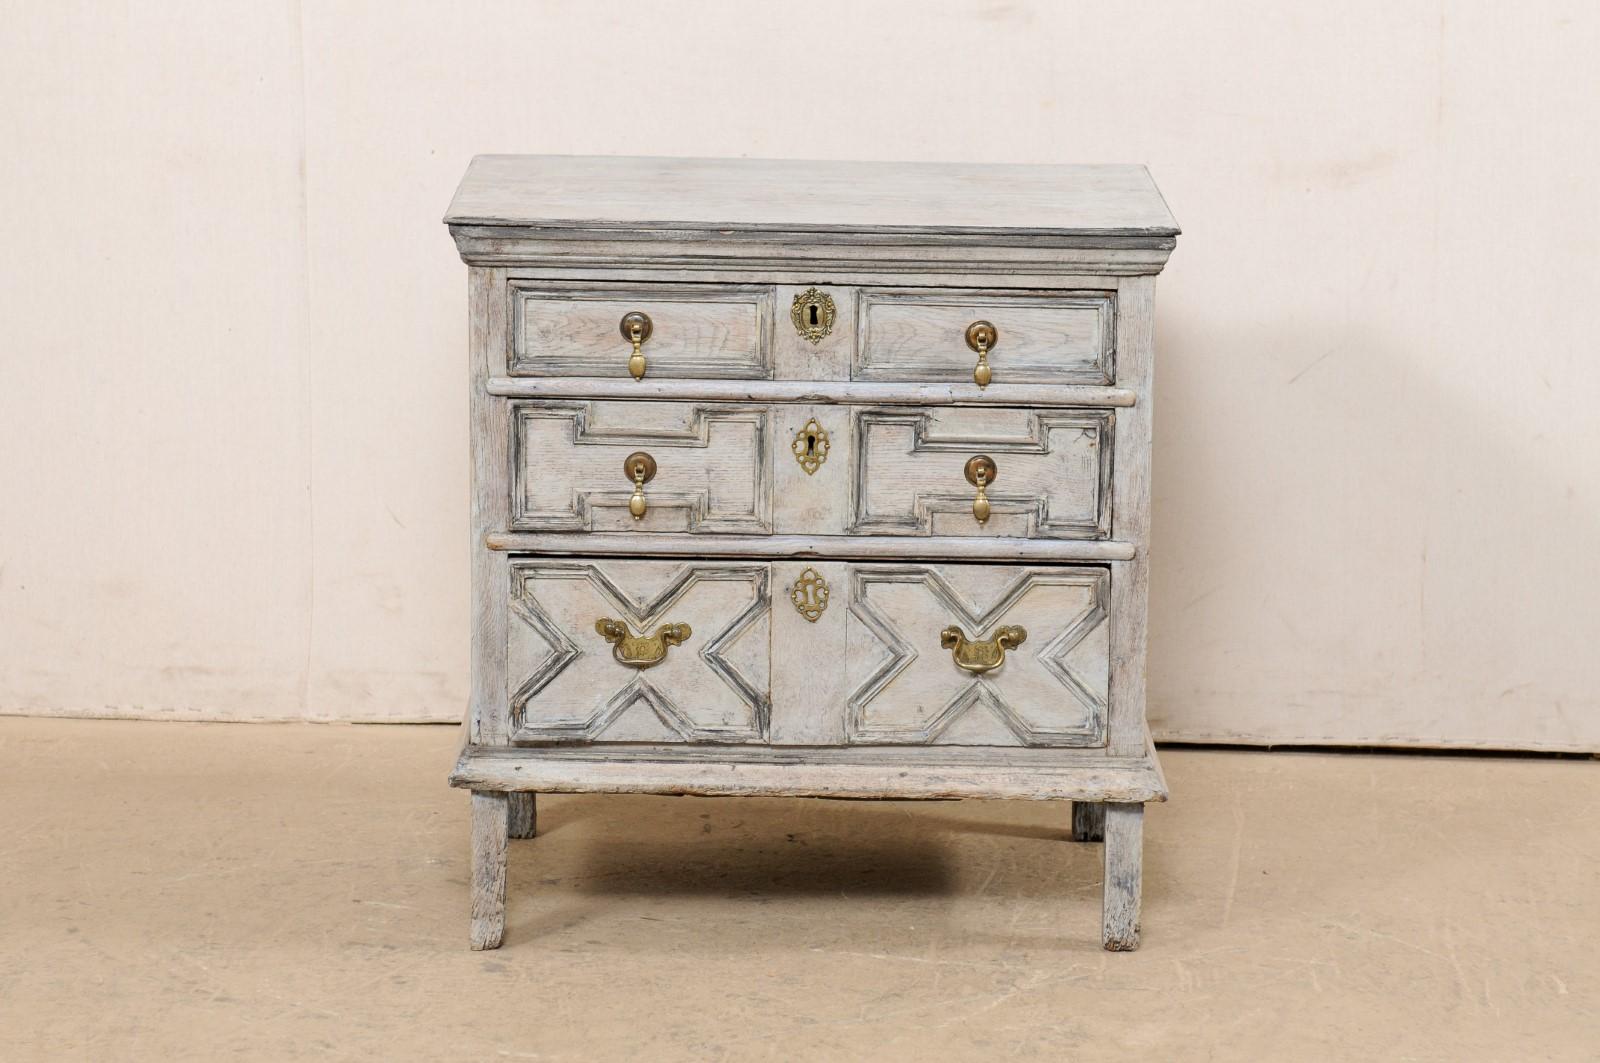 19th Century 19th C. English Smaller-Sized Chest Adorn in Geometrically Carved Panels 